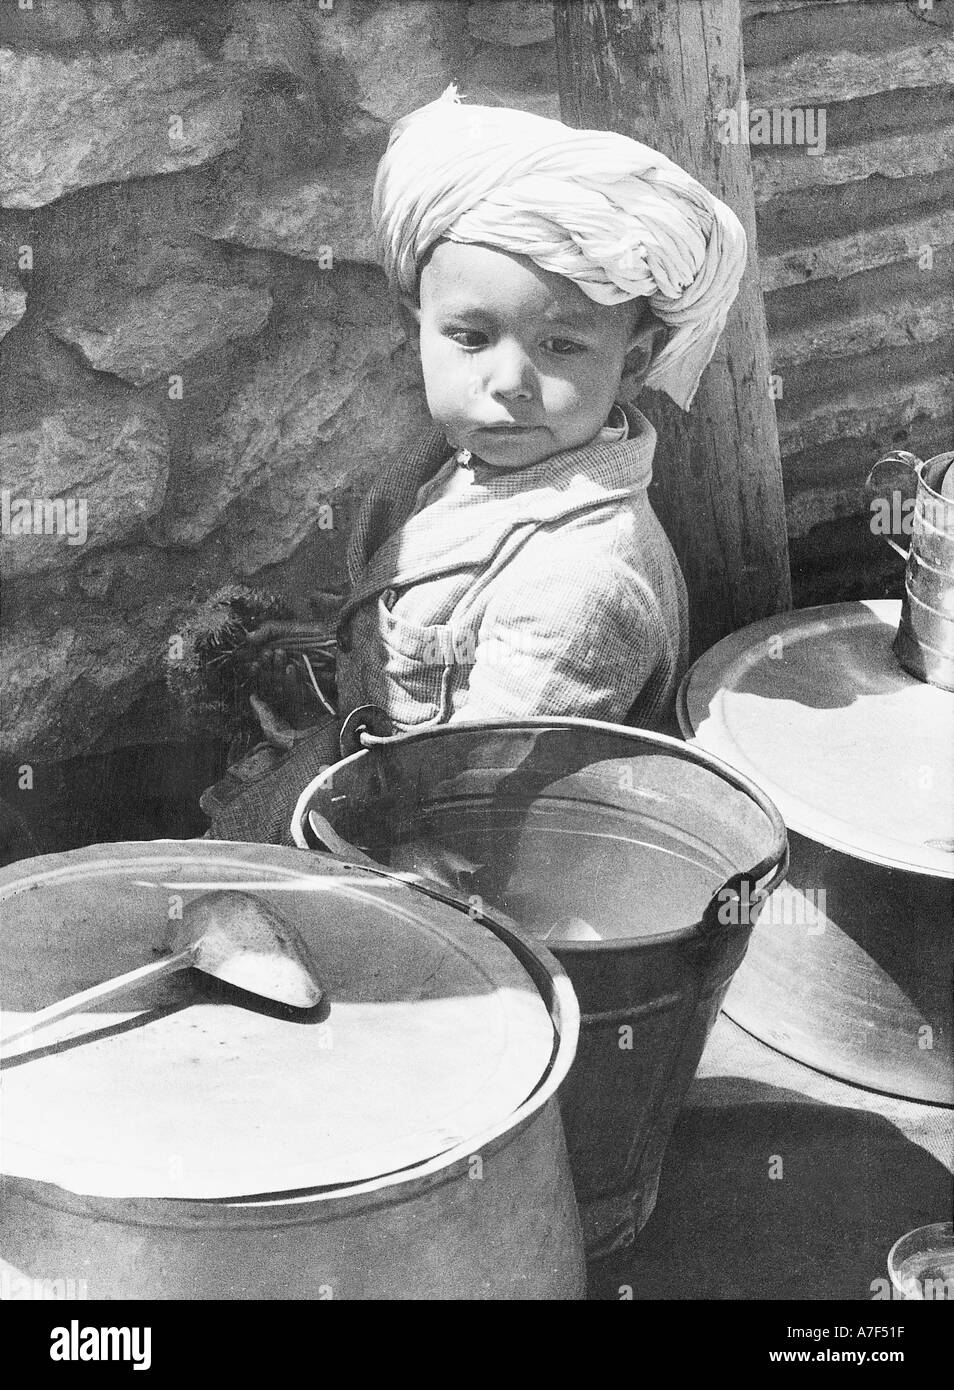 old vintage 1900s black and white pictures Life in India Indian life Stock Photo